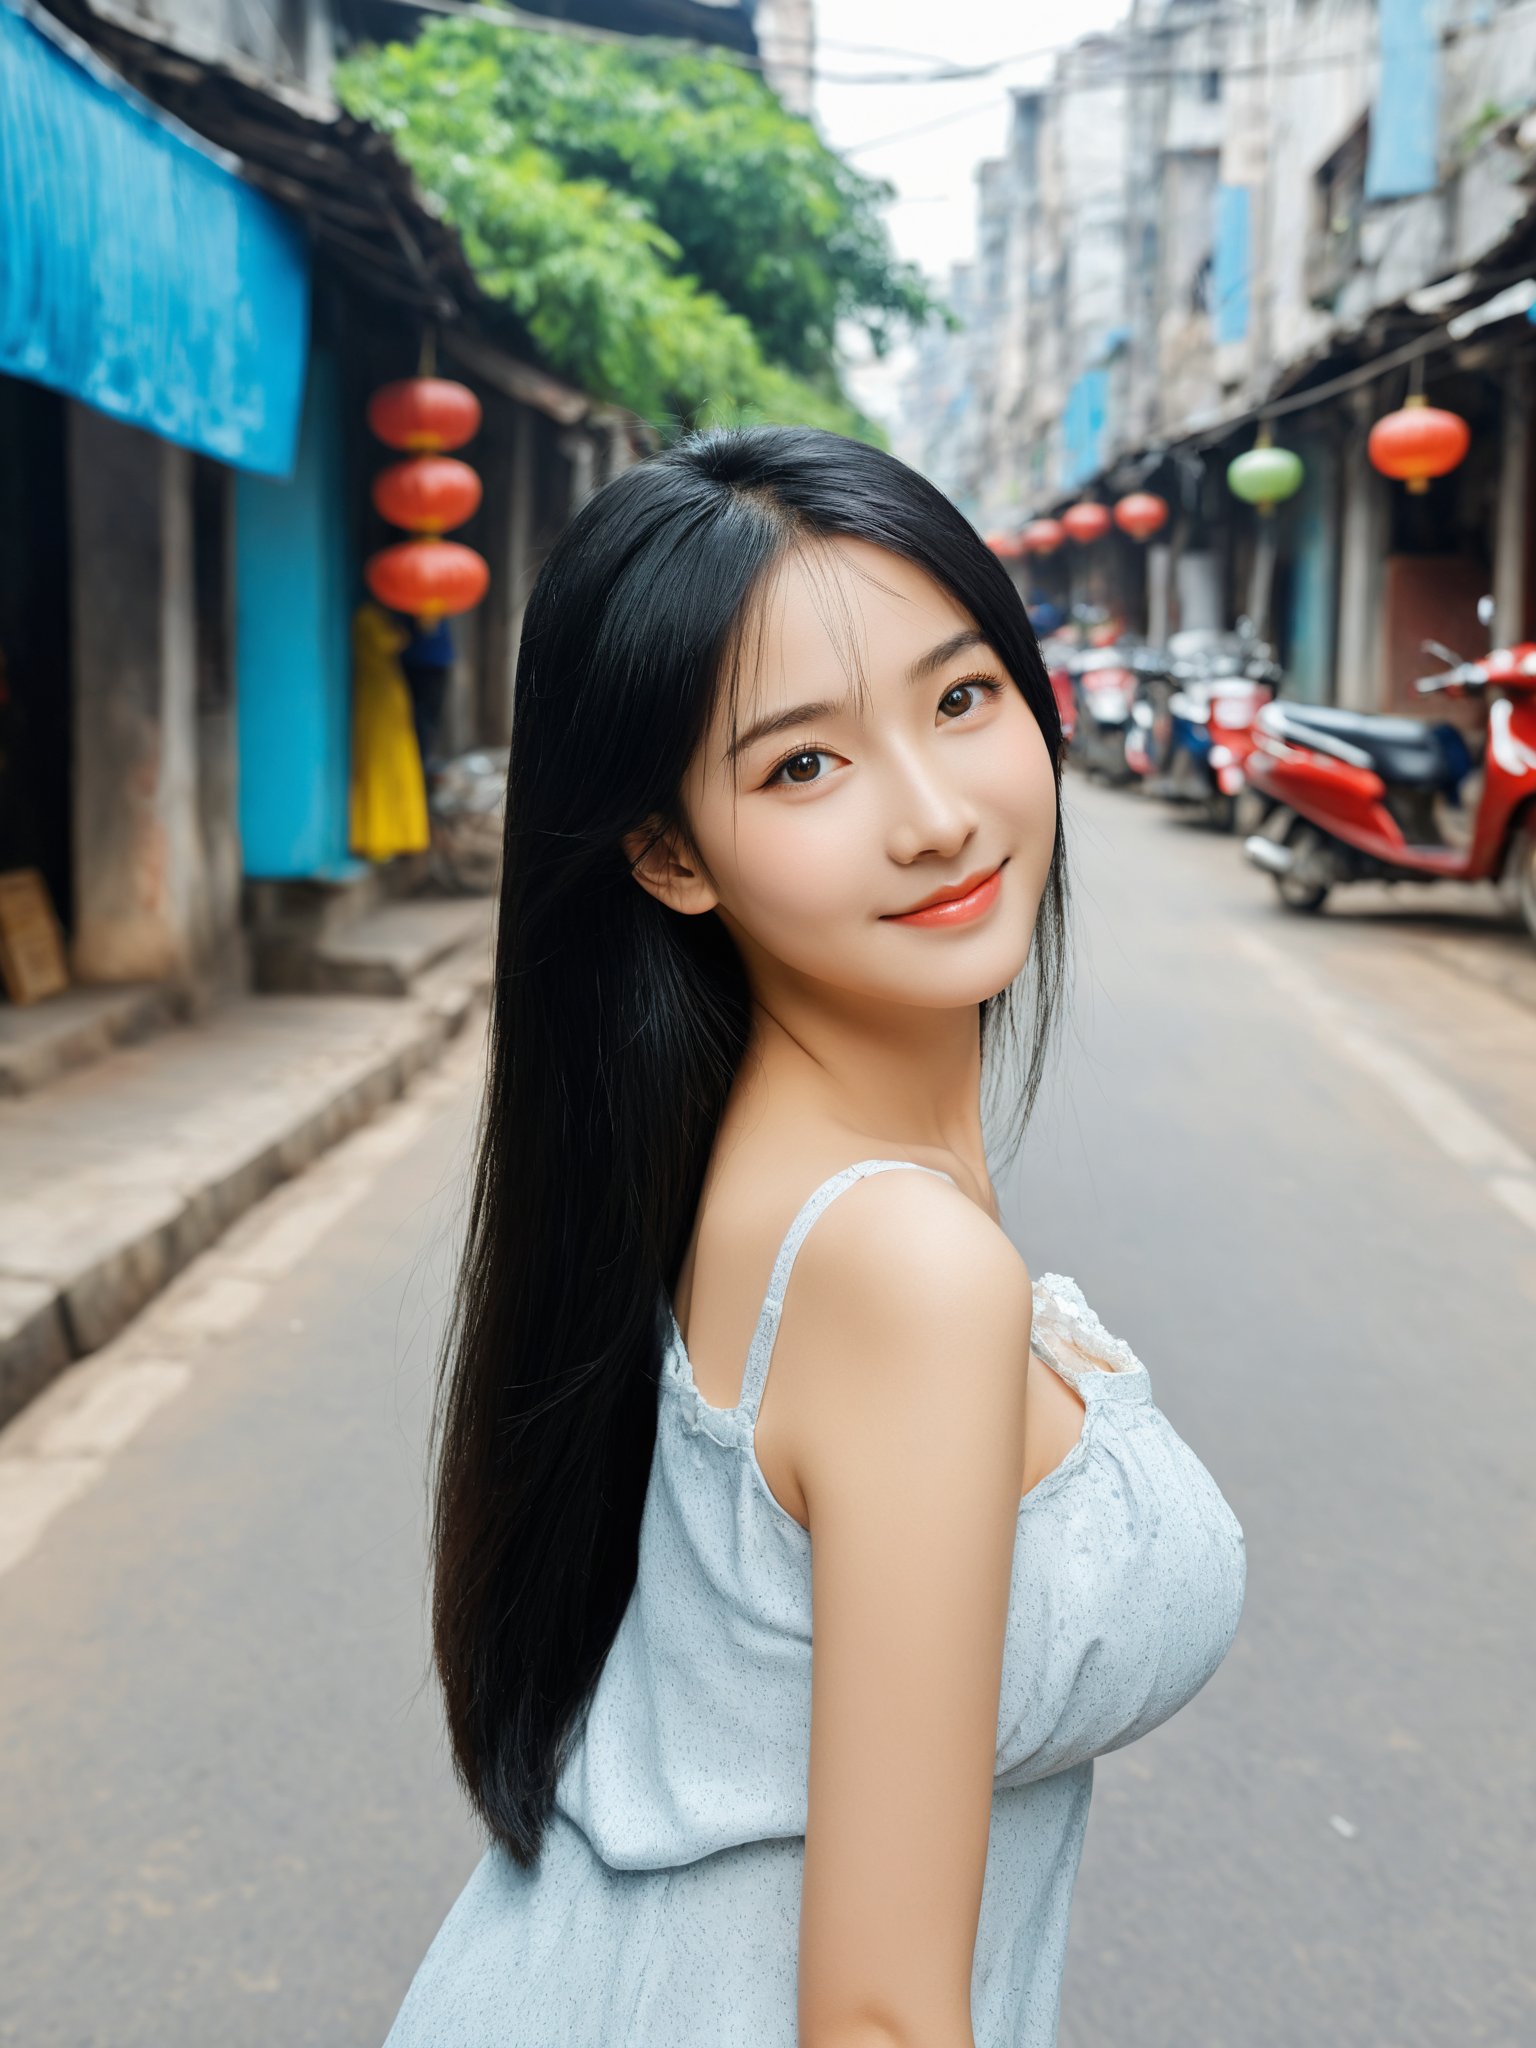 masterpiece, best quality, realistic, photo, real, incredibly_absurdres, Ultra HD,Affectionately looking at you,8K,UHD,in the vietnamese city street, full body, arms behind head,arms behind back , bust photo,The 20-year-old vietnamese girl,She has black hair. The lines of her face are soft and smooth. Her skin is as fair as snow, soft and delicate, and her eyes are bright and bright, deep and mysterious, making people feel endless charm and appeal. The eyebrows are slender and graceful, the nose is straight and noble, the lips are rosy and seductive, and the slightly raised angle reveals confidence and elegance. Her facial features are delicate and three-dimensional, with well-defined contours, like a fine painting or a finely carved work of art. The overall feeling is gentle, elegant, noble and full of charm.masterpiece, best quality, realistic, photo, real, absurdres, incredibly_absurdres, huge_filesize, bust, girl, kawaii, adorable girl, bishoujo, ojousama, idol, student, long hair, black hair, beautiful detailed eyes, looking at viewer, seductive smile, black eyes, large breasts, arms behind back ,